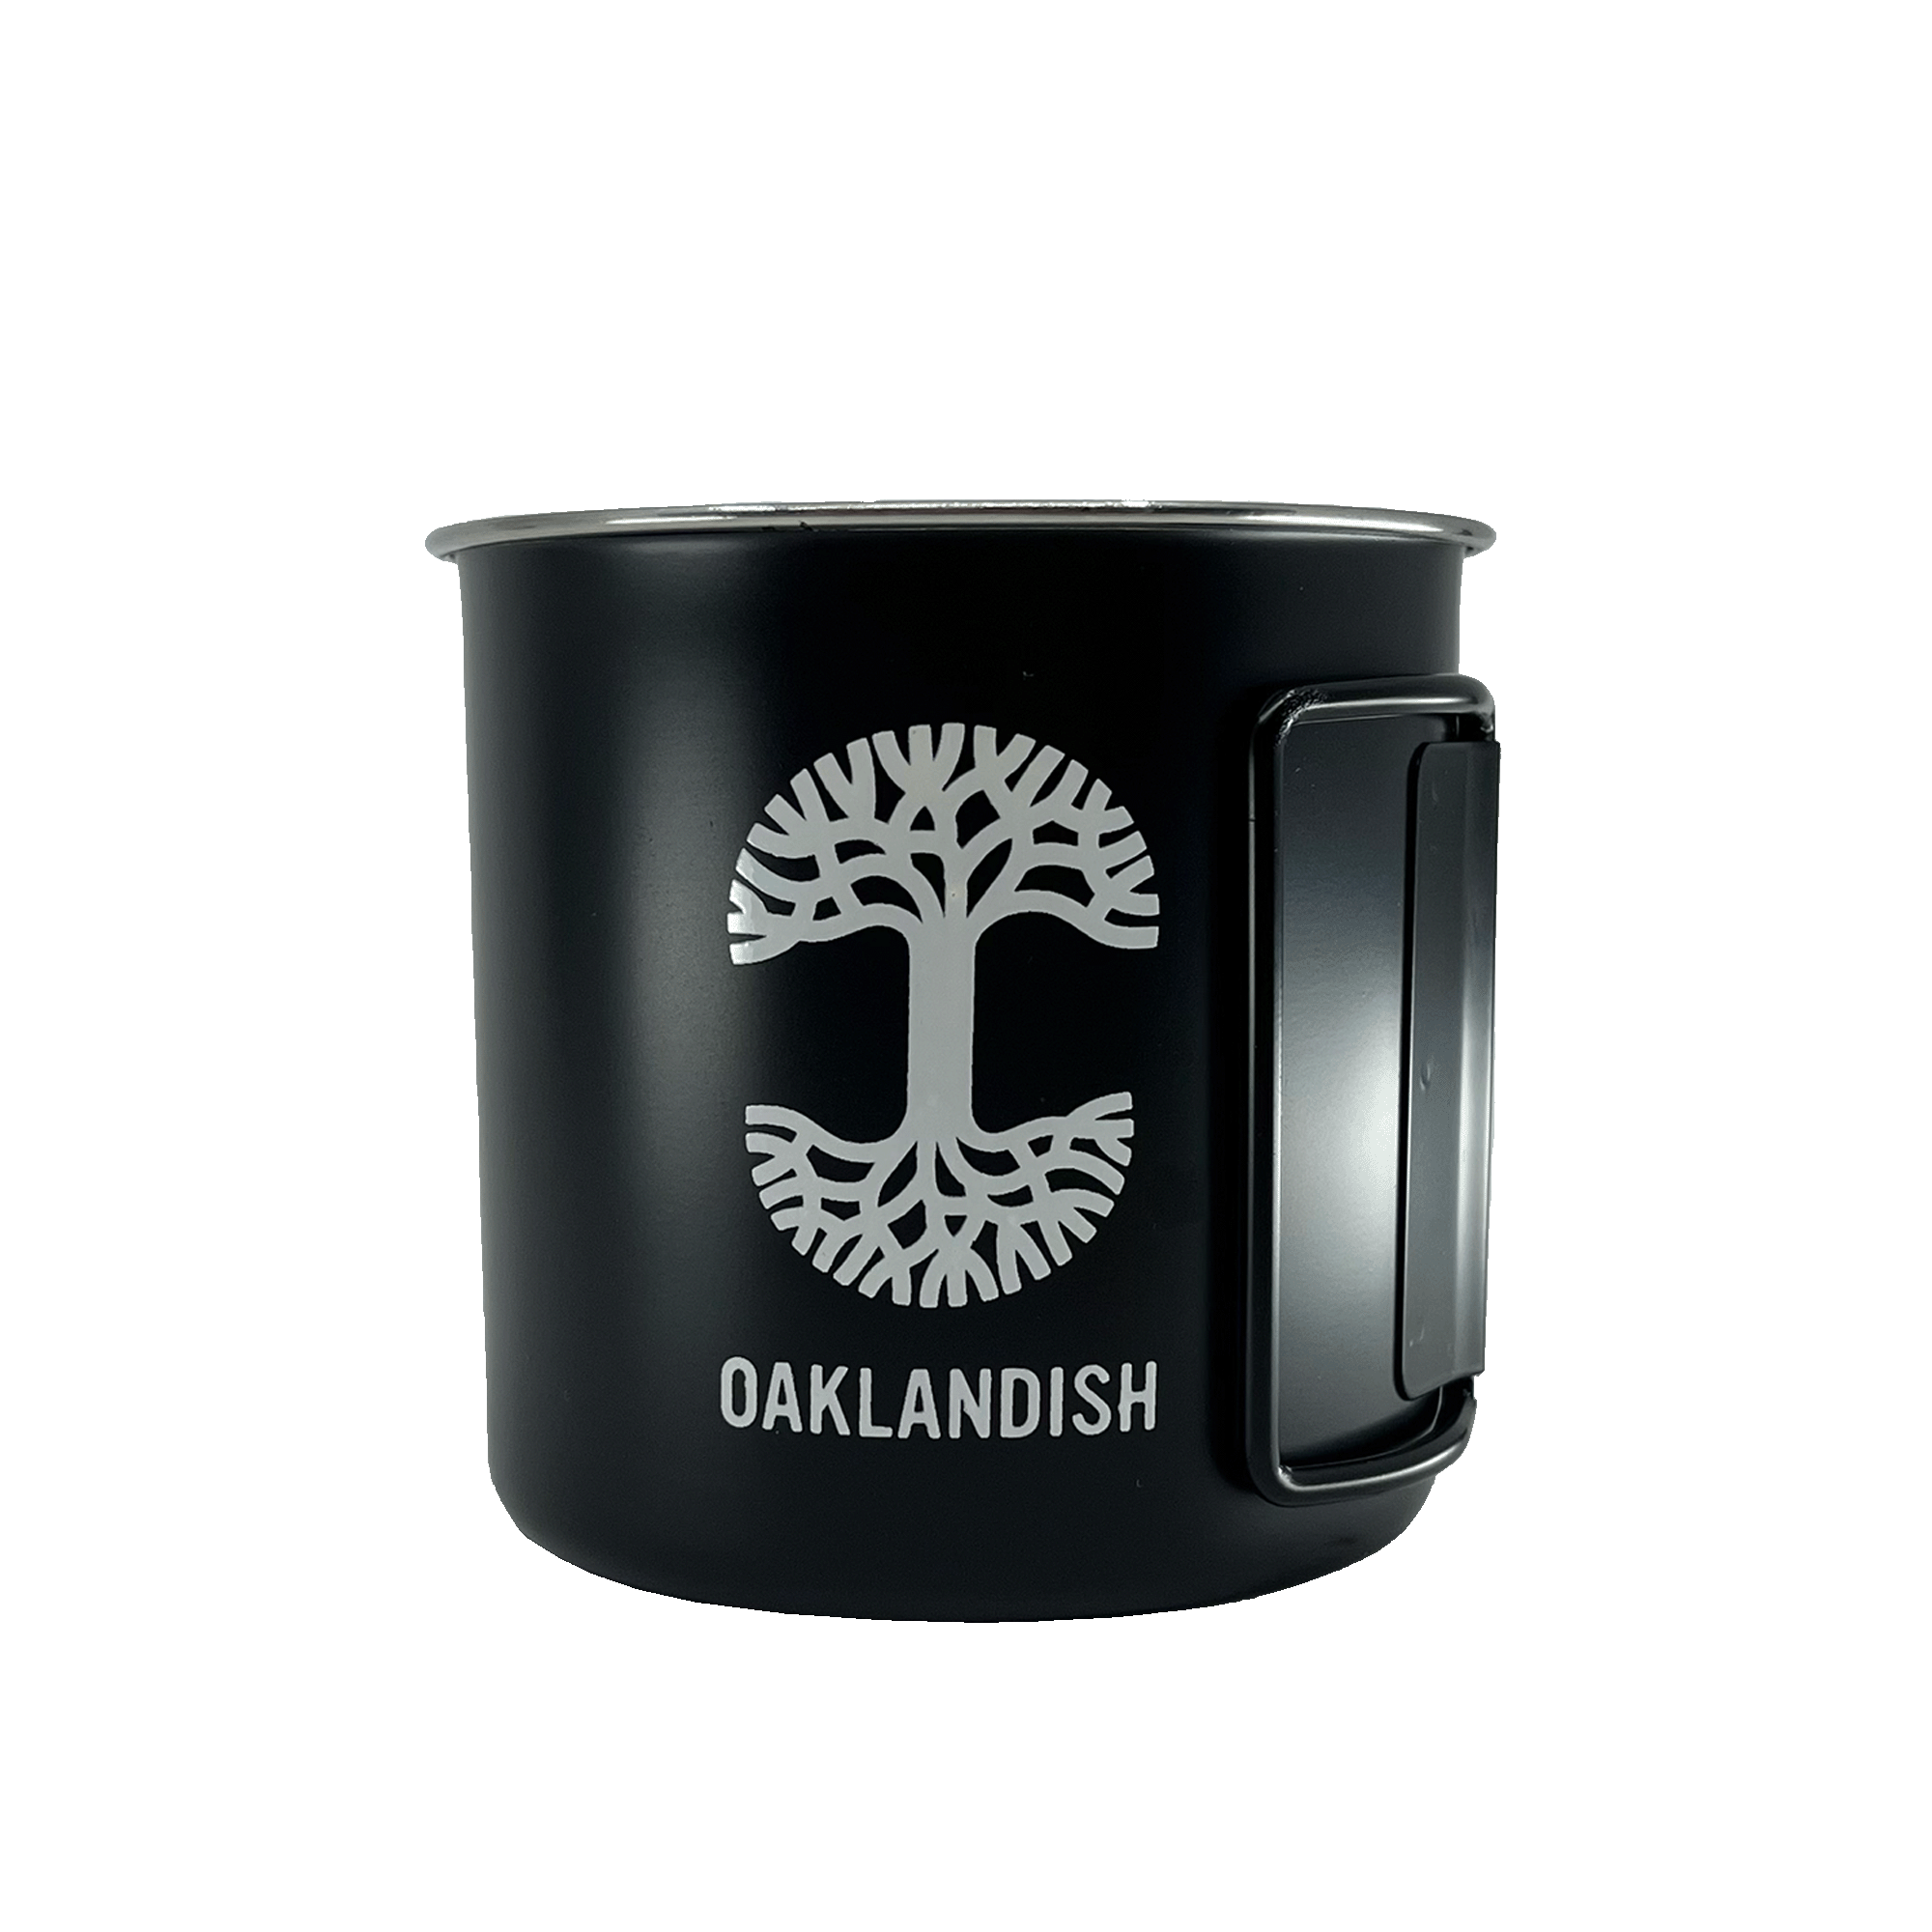 Black stainless steel camp mug with collapsable handle, large white Oaklandish tree logo, and wordmark.